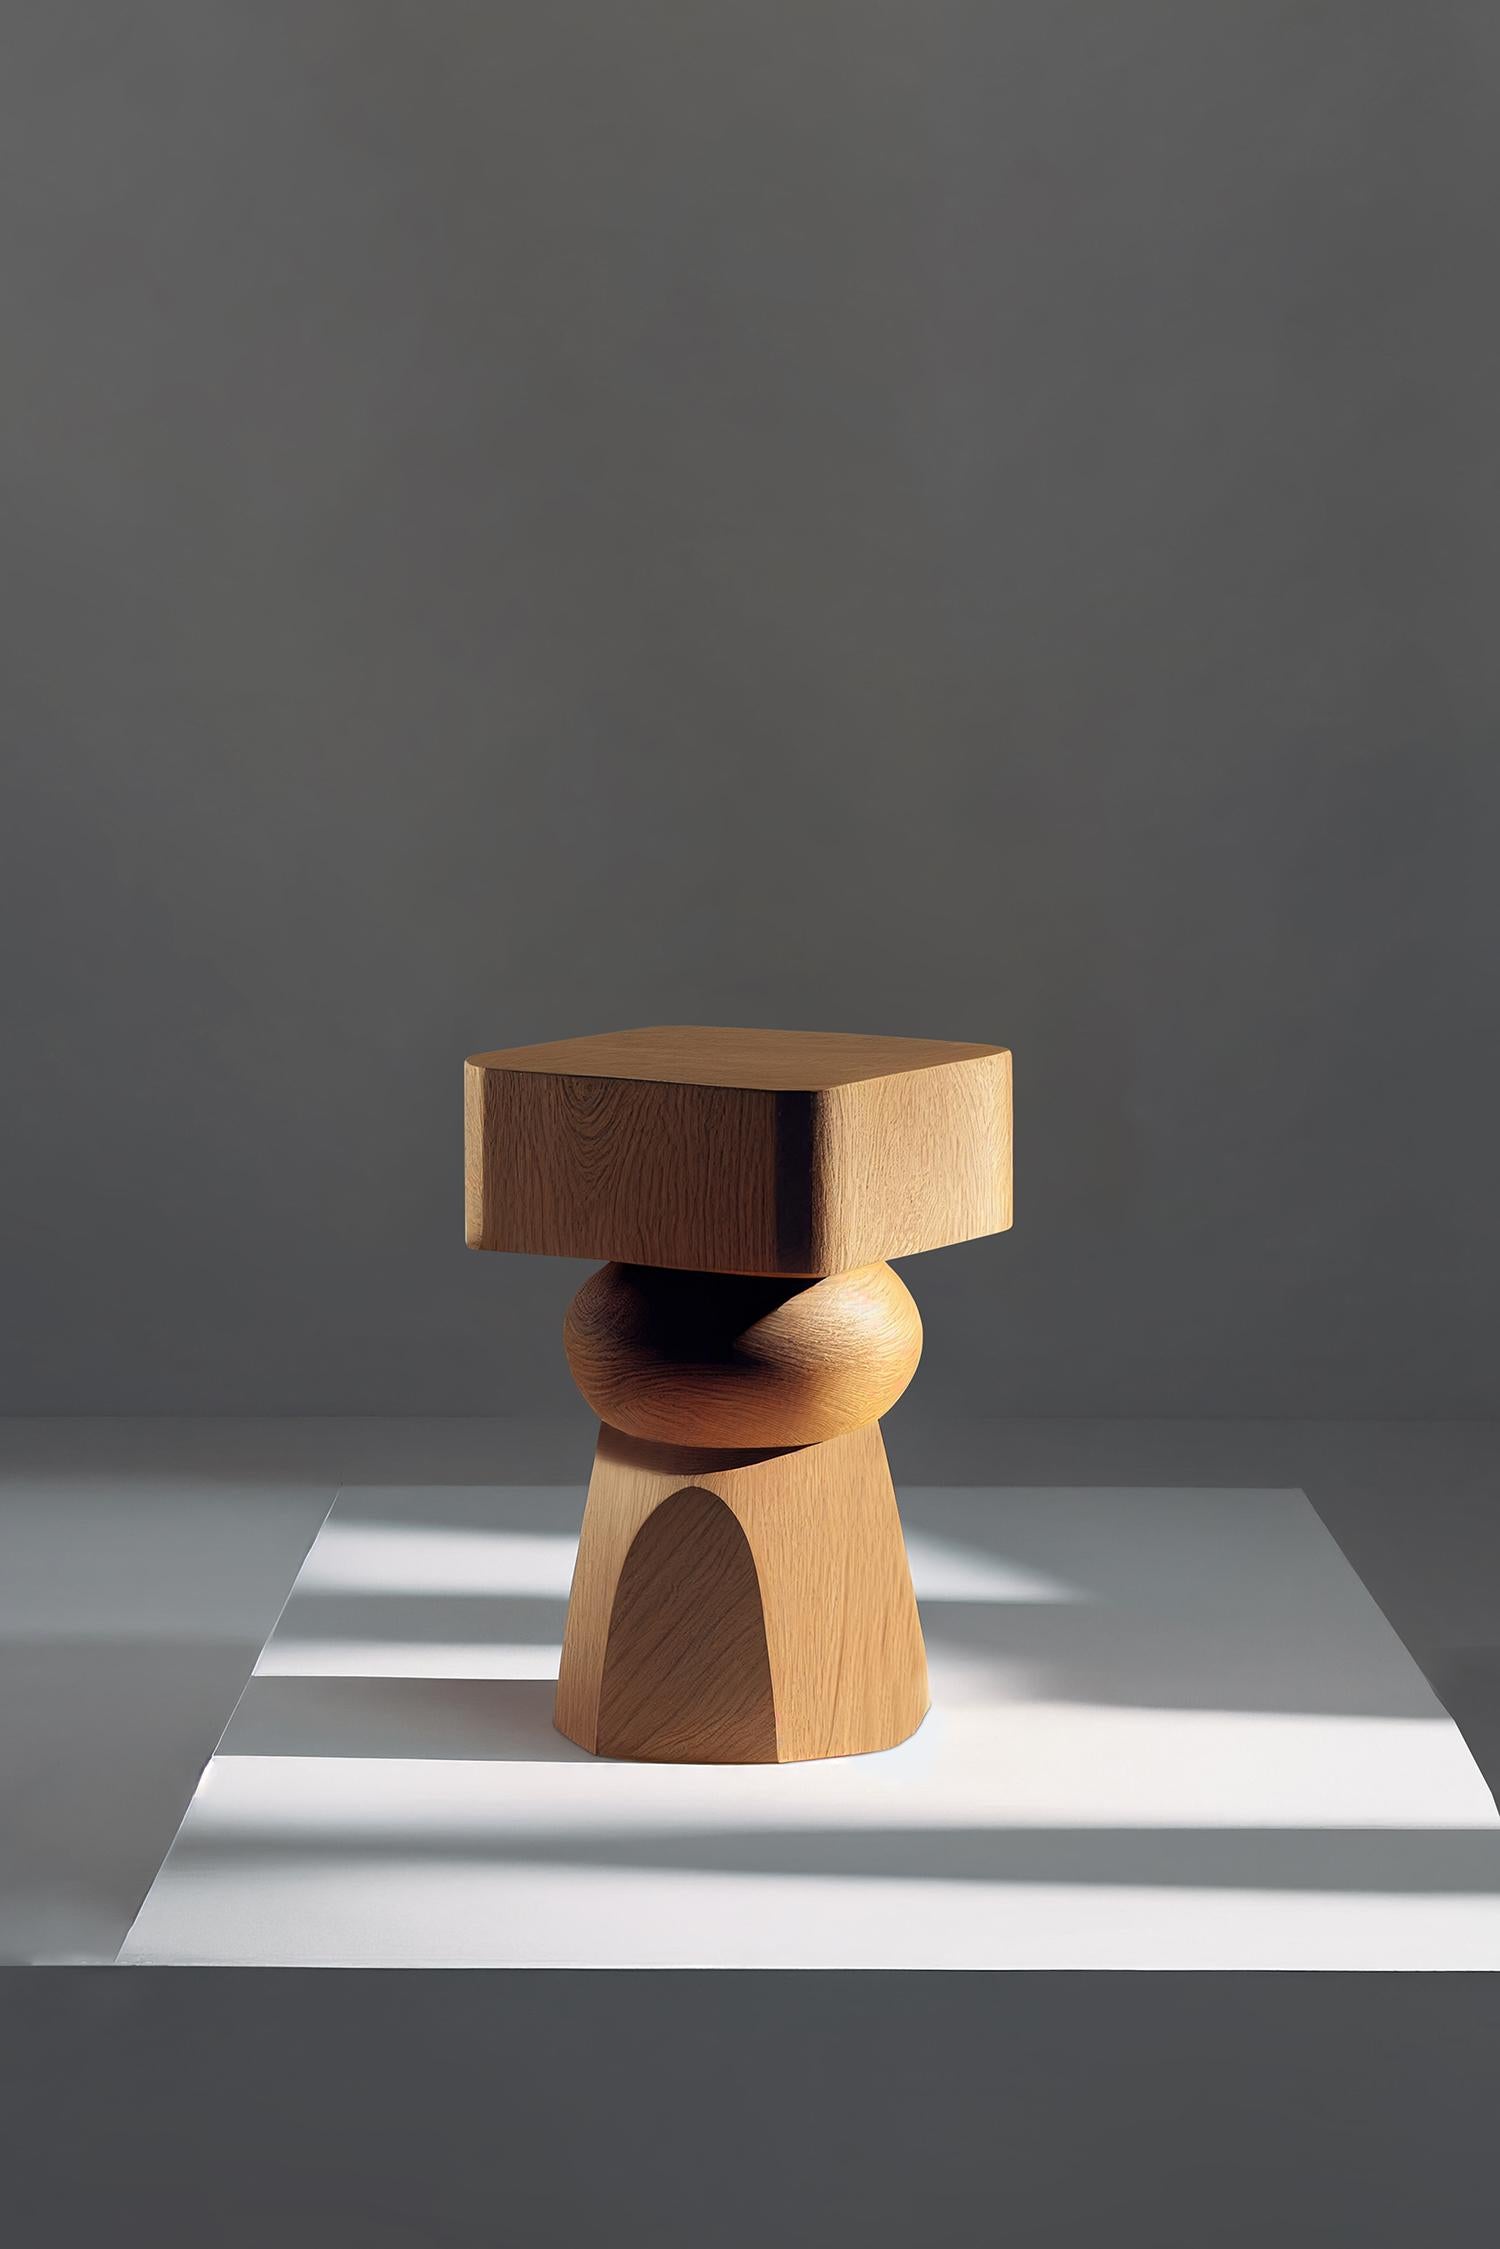 Socle 6 side table, auxiliary table, night stand

Socle is a small solid wood table designed by the NONO design team. Made of solid wood, its elaborated construction serves as a support, much like a plinth for a statue or sculpture.

In the past,